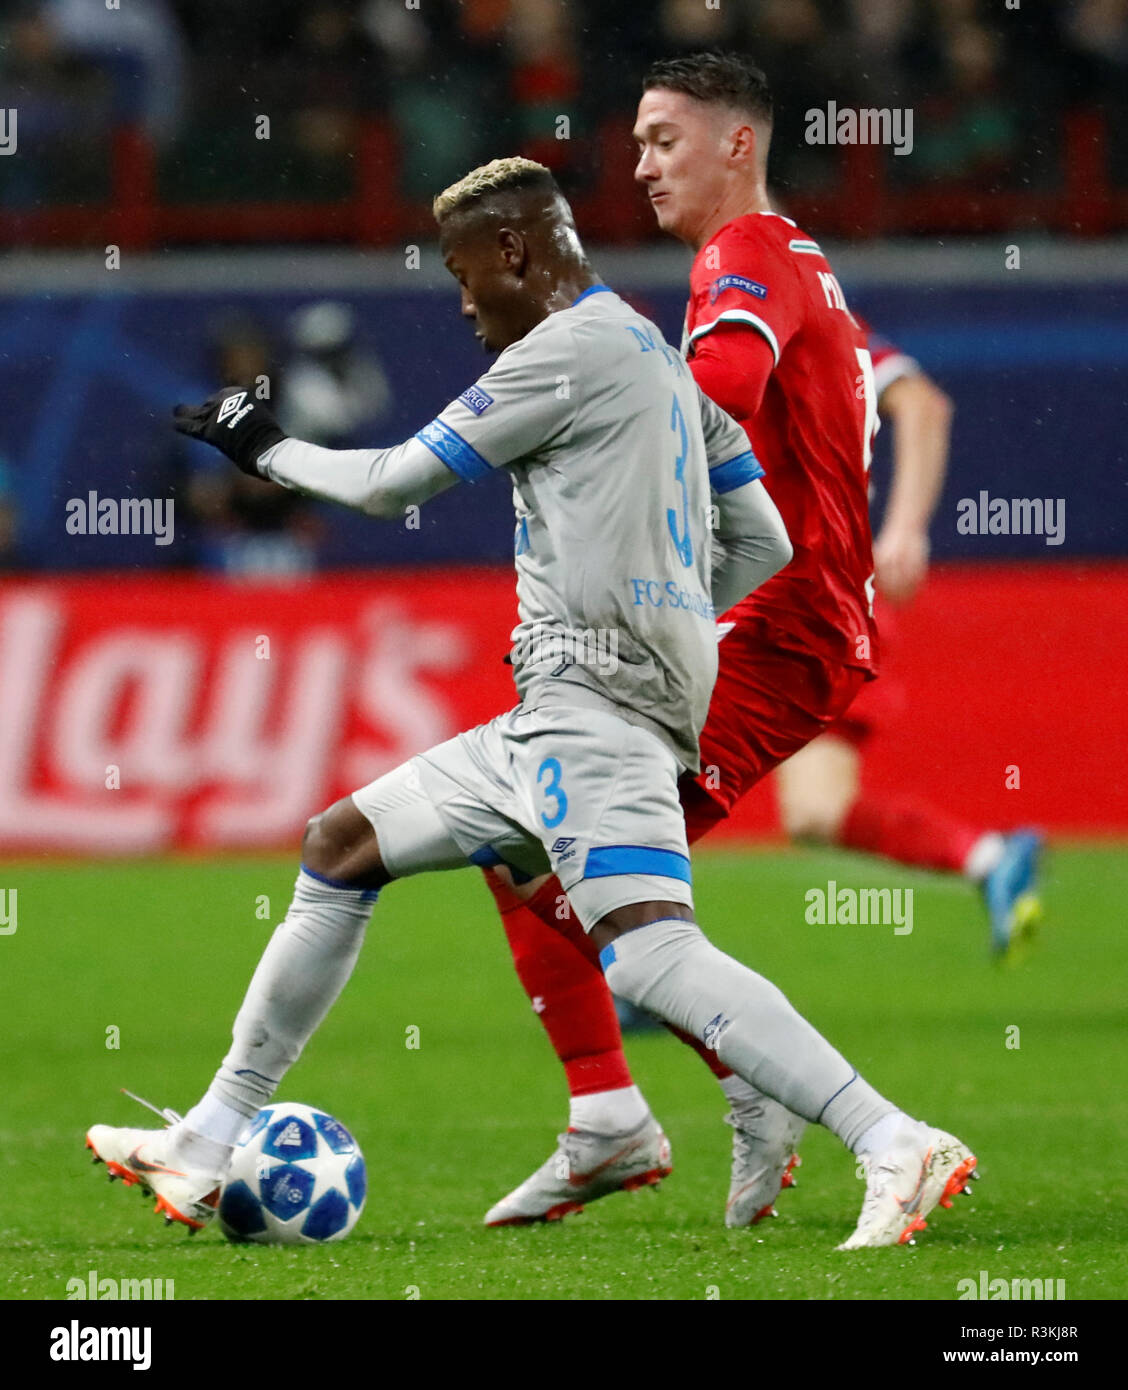 MOSCOW, RUSSIA - OCTOBER 03: Anton Miranchuk (R) of FC Lokomotiv Moscow and Hamza Mendyl of FC Schalke 04 vie for the ball during the Group D match of the UEFA Champions League between FC Lokomotiv Moscow and FC Schalke 04 at Lokomotiv Stadium on October 3, 2018 in Moscow, Russia. (MB Media) Stock Photo